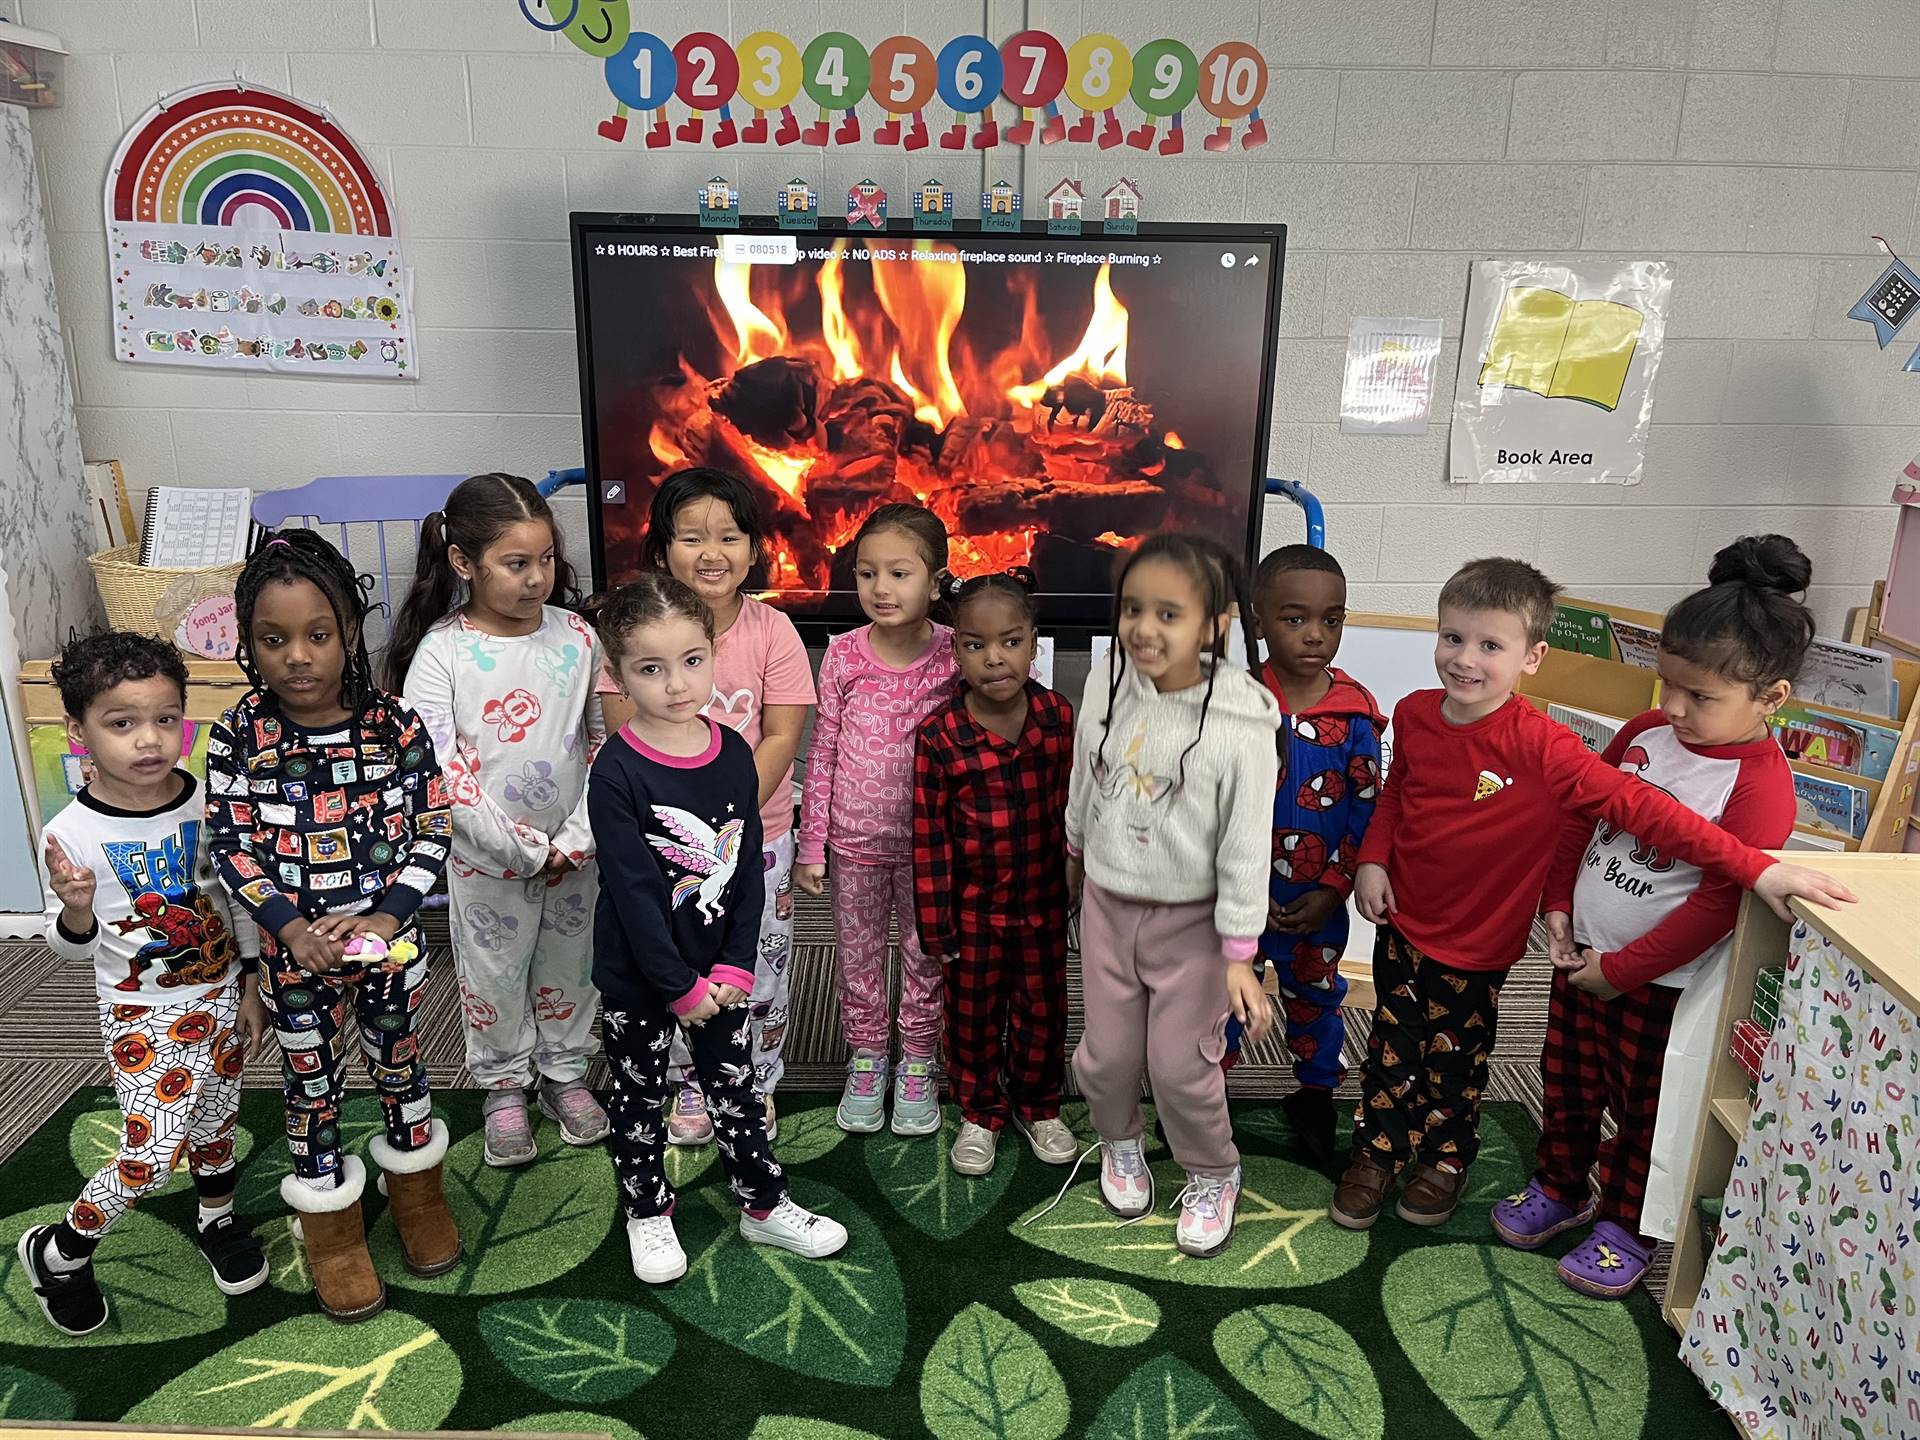 Preschoolers in pajamas in front of the fireplace